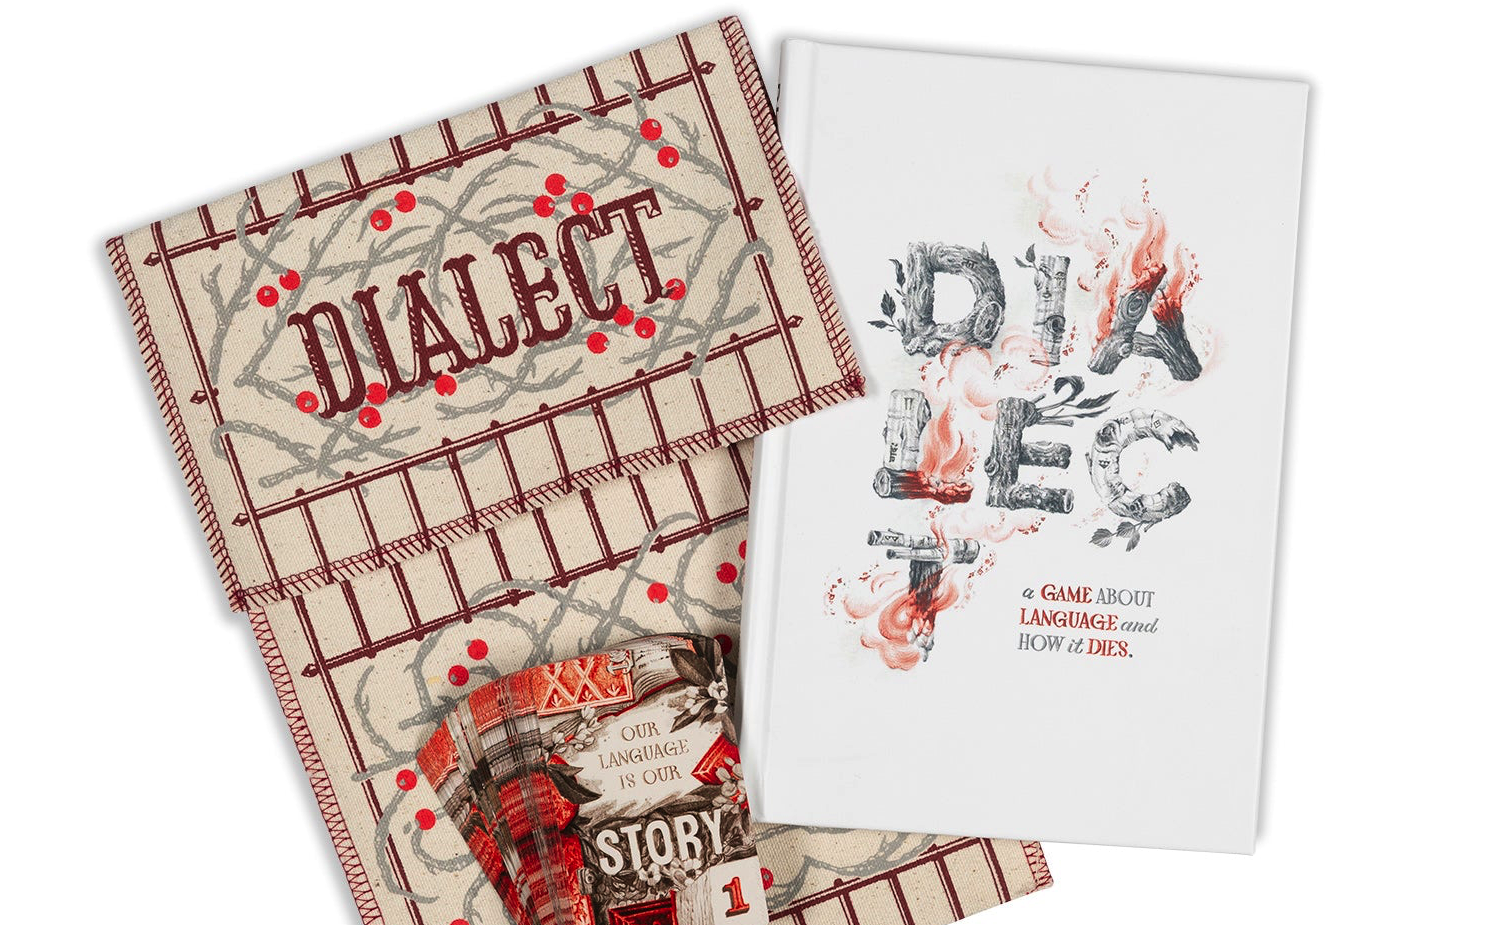 Dialect RPG books